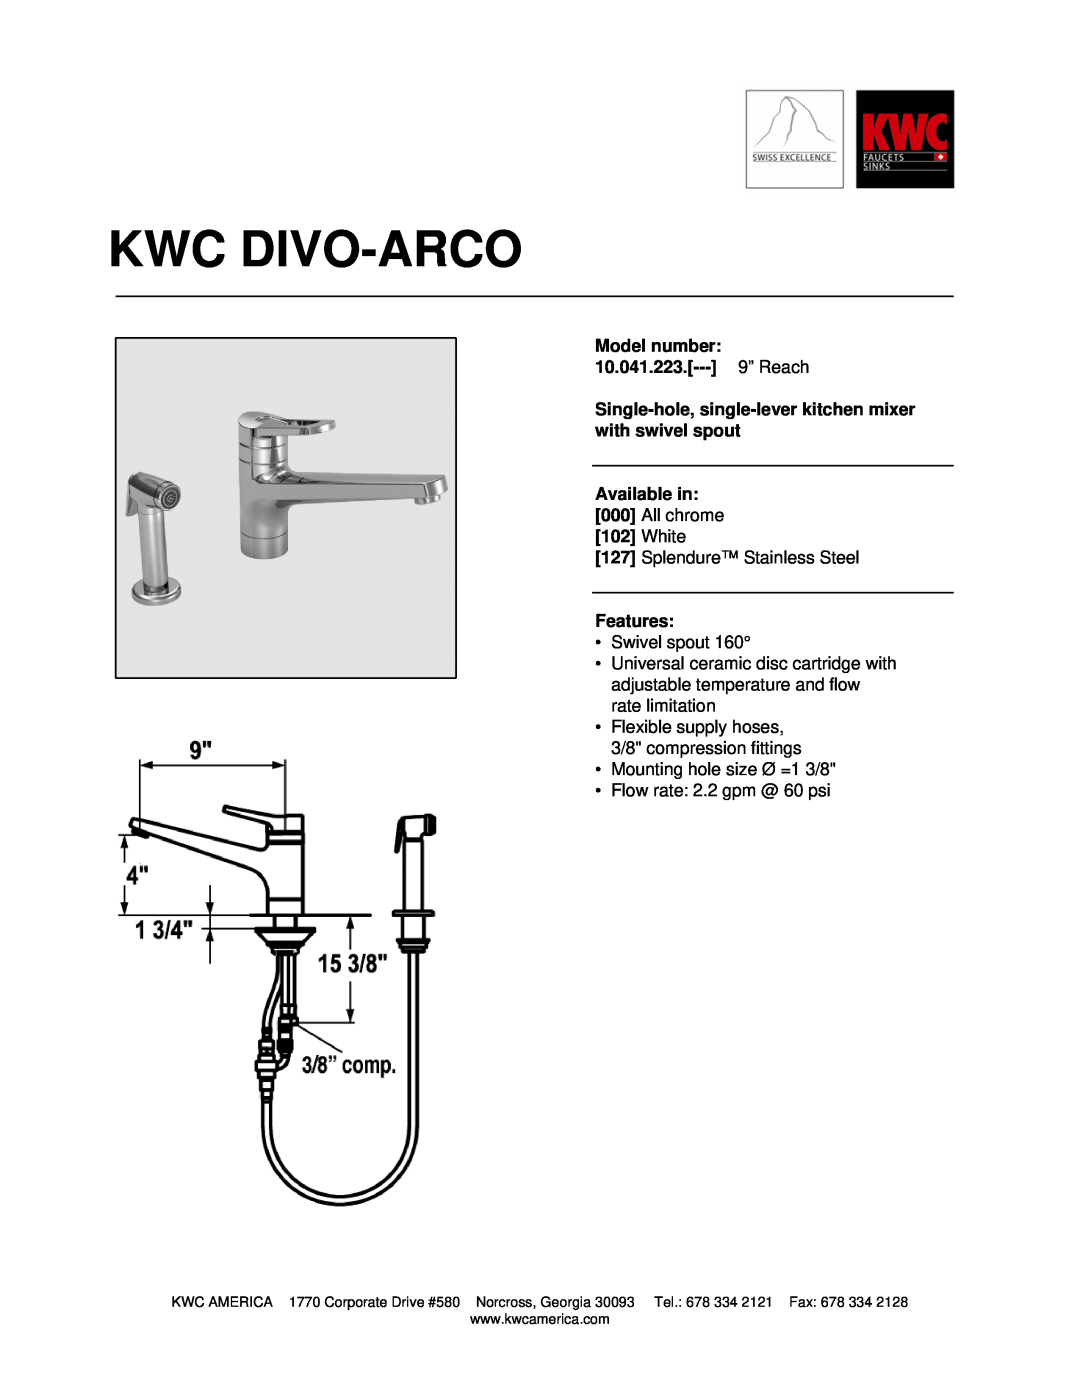 KWC manual Kwc Divo-Arco, Model number 10.041.223.--- 9” Reach, Available in, White, Features 